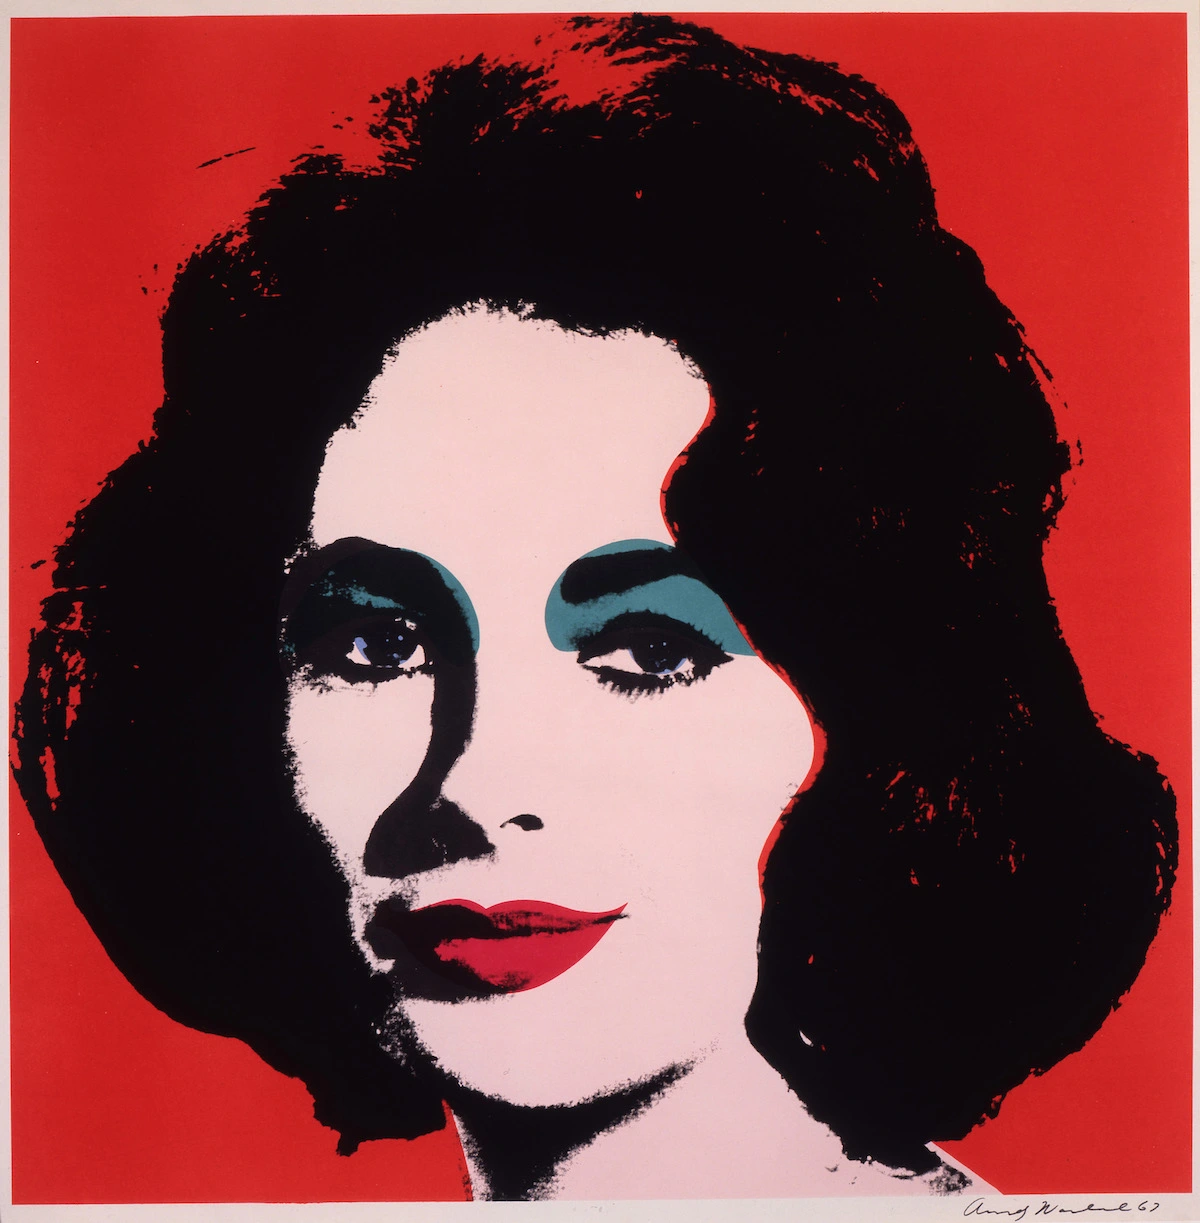 Andy Warhol Exhibition to Come to Saudi Arabia as Part of AlUla ArtsFestival